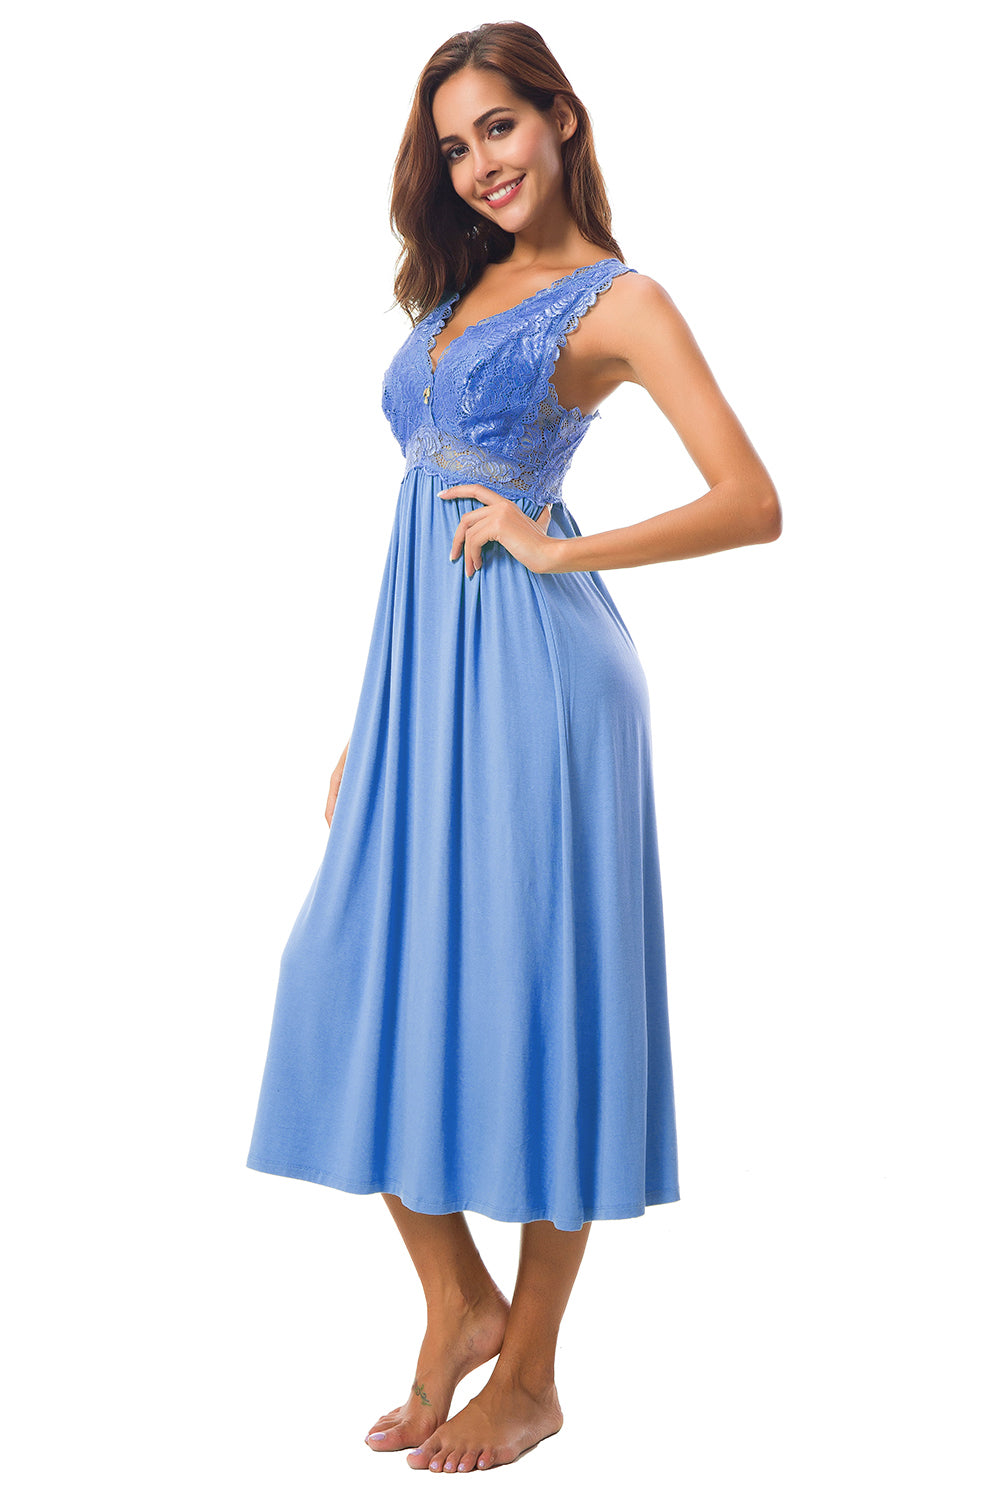 Sexy Lace Jersey Elegant Long Nightgown Chemises Skyblue